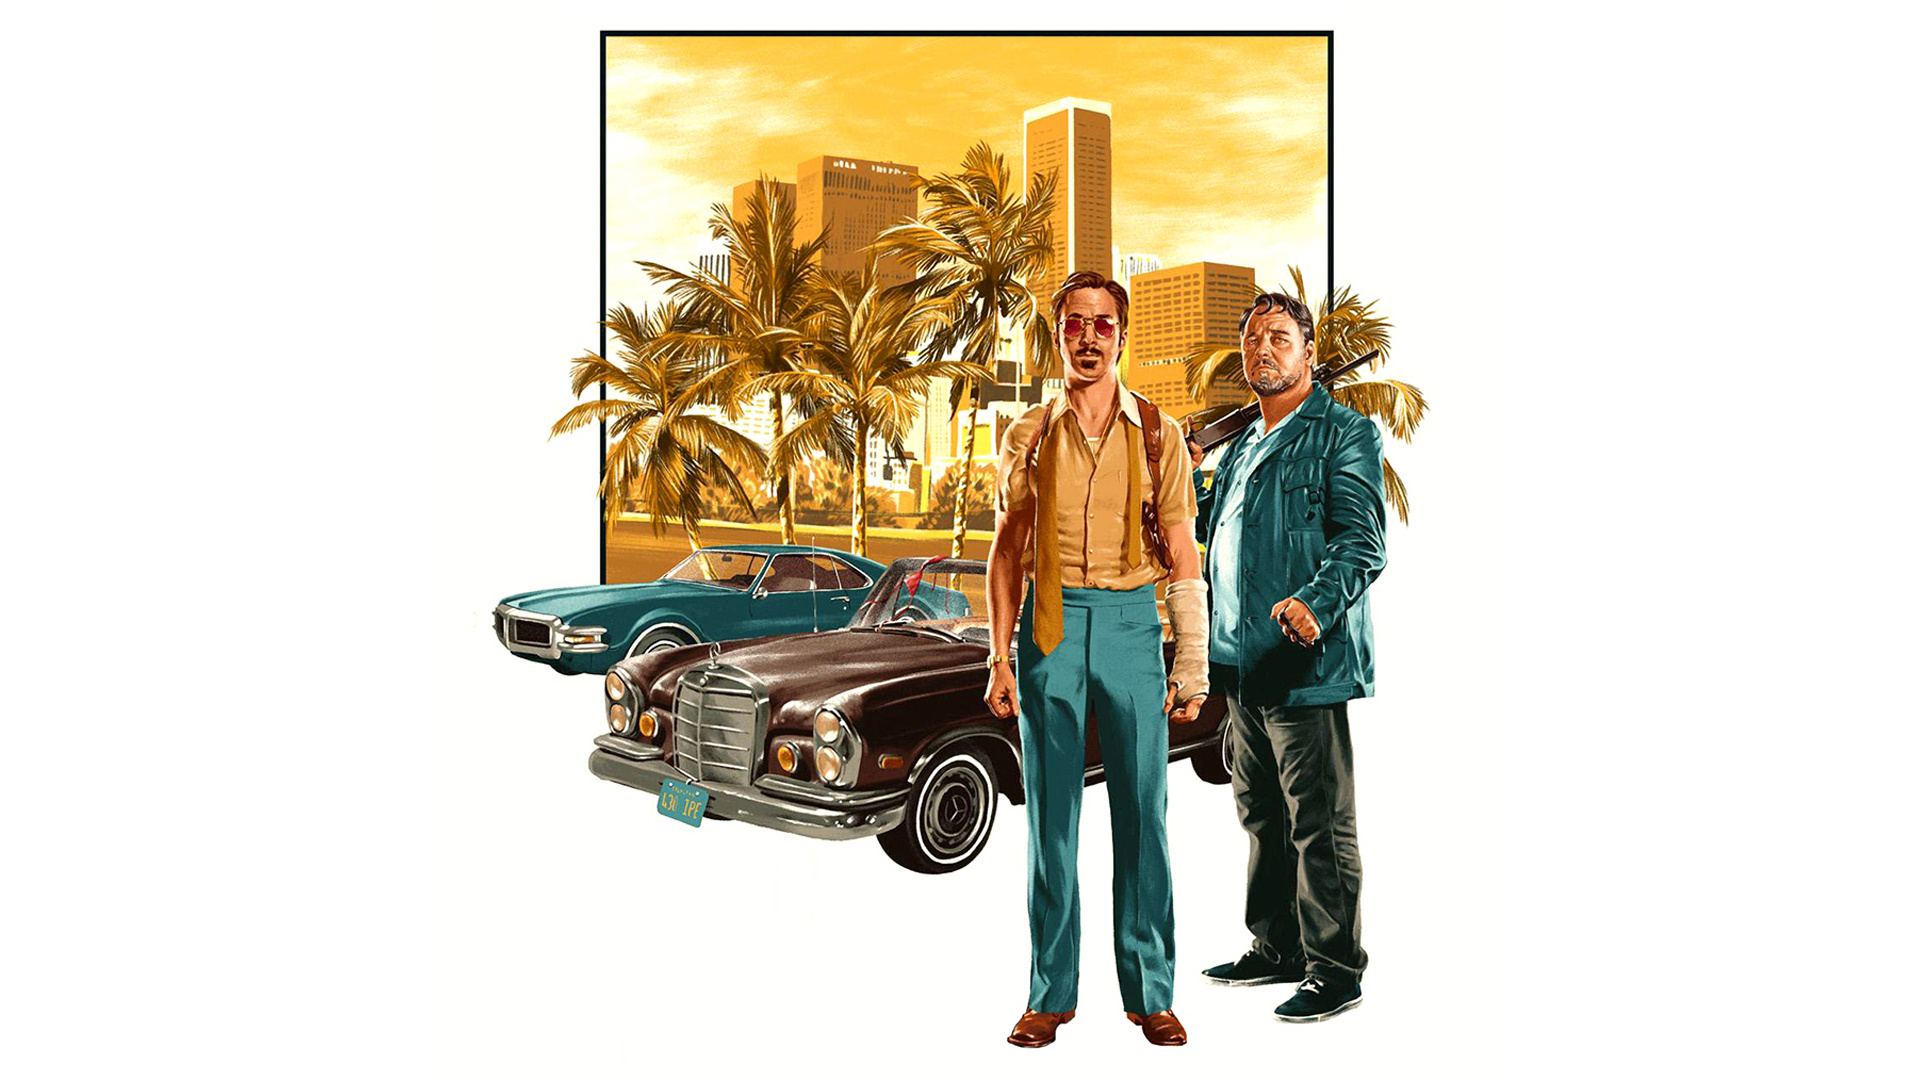 The Nice Guys, Crime-solving duo, 1970s Los Angeles, Comedy mystery, 1920x1080 Full HD Desktop